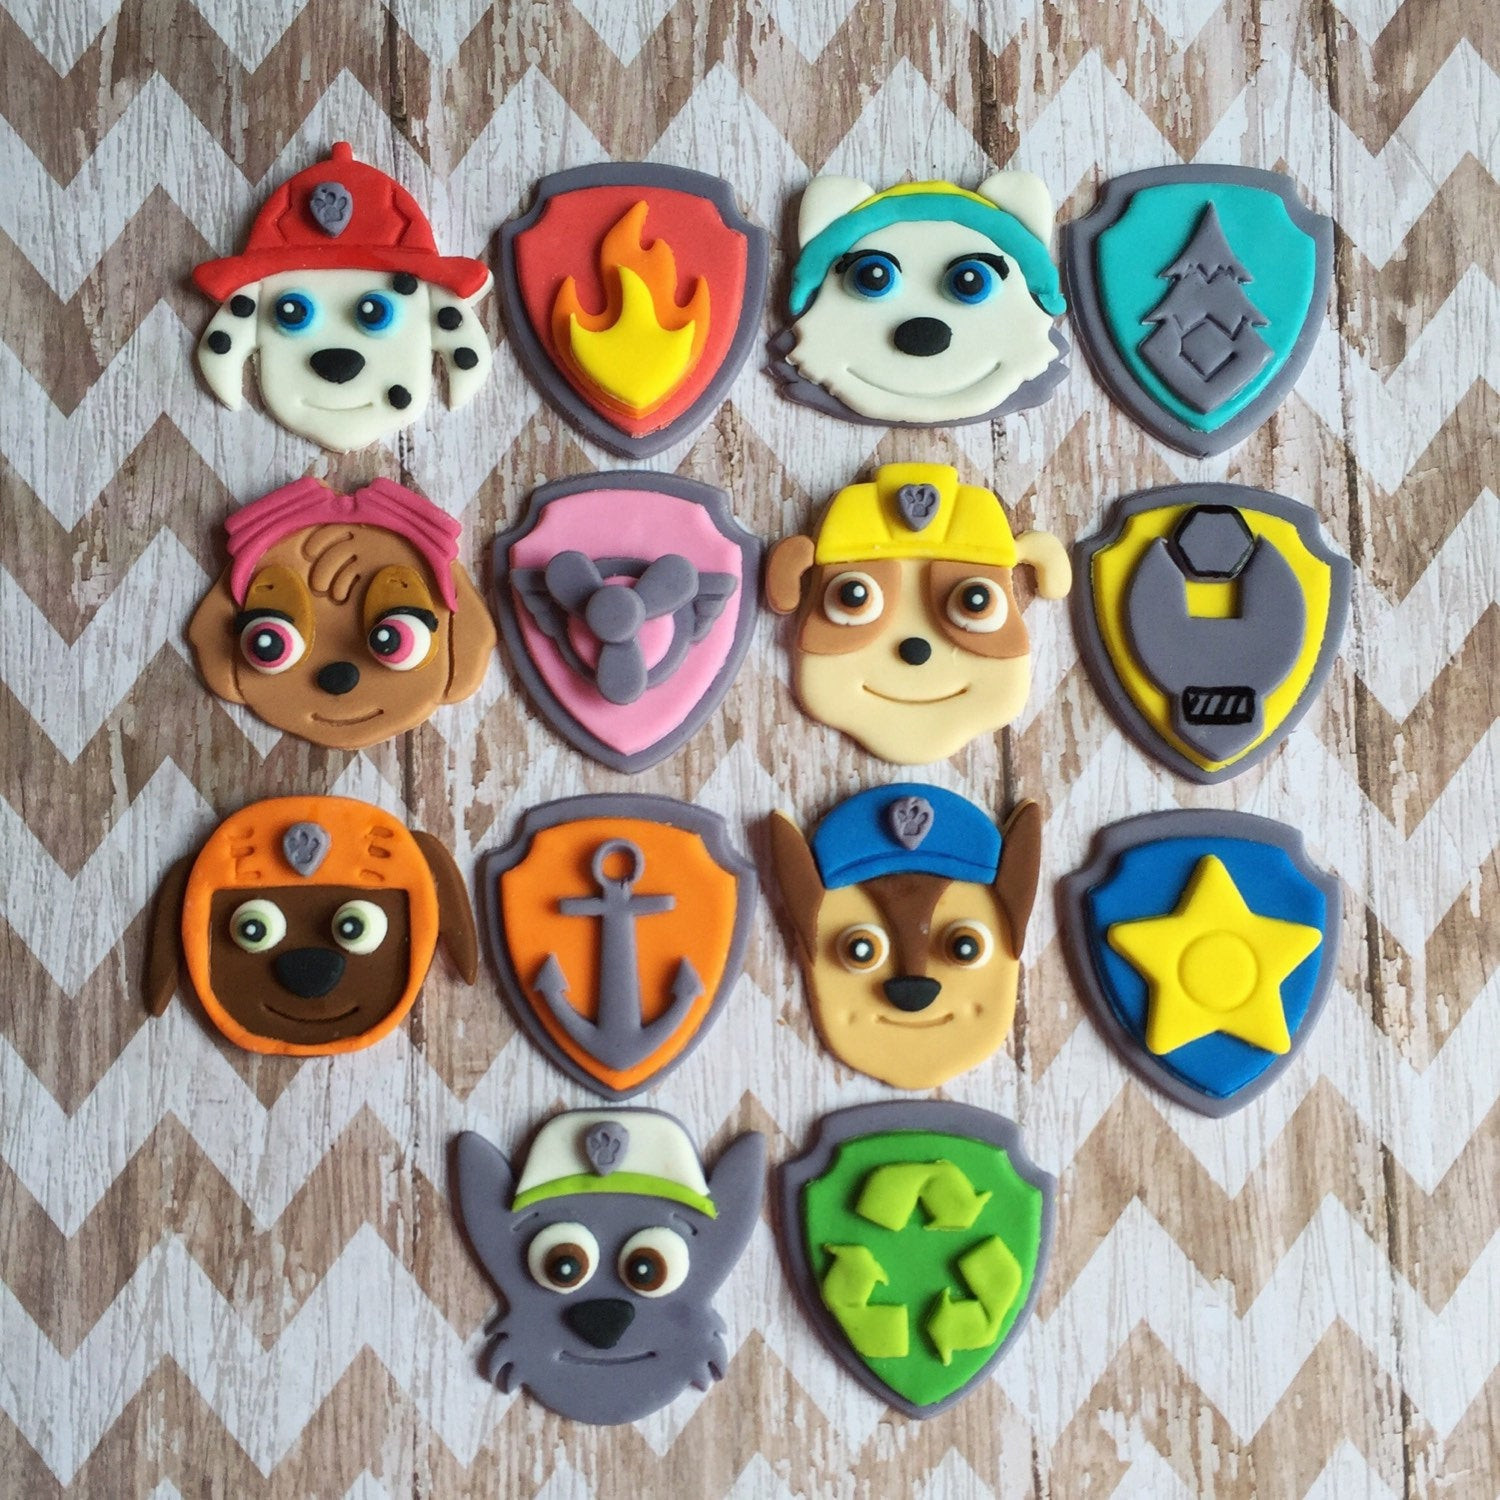 Paw Patrol Cupcakes
 Fondant Paw Patrol cupcake toppers pups and or shield badges